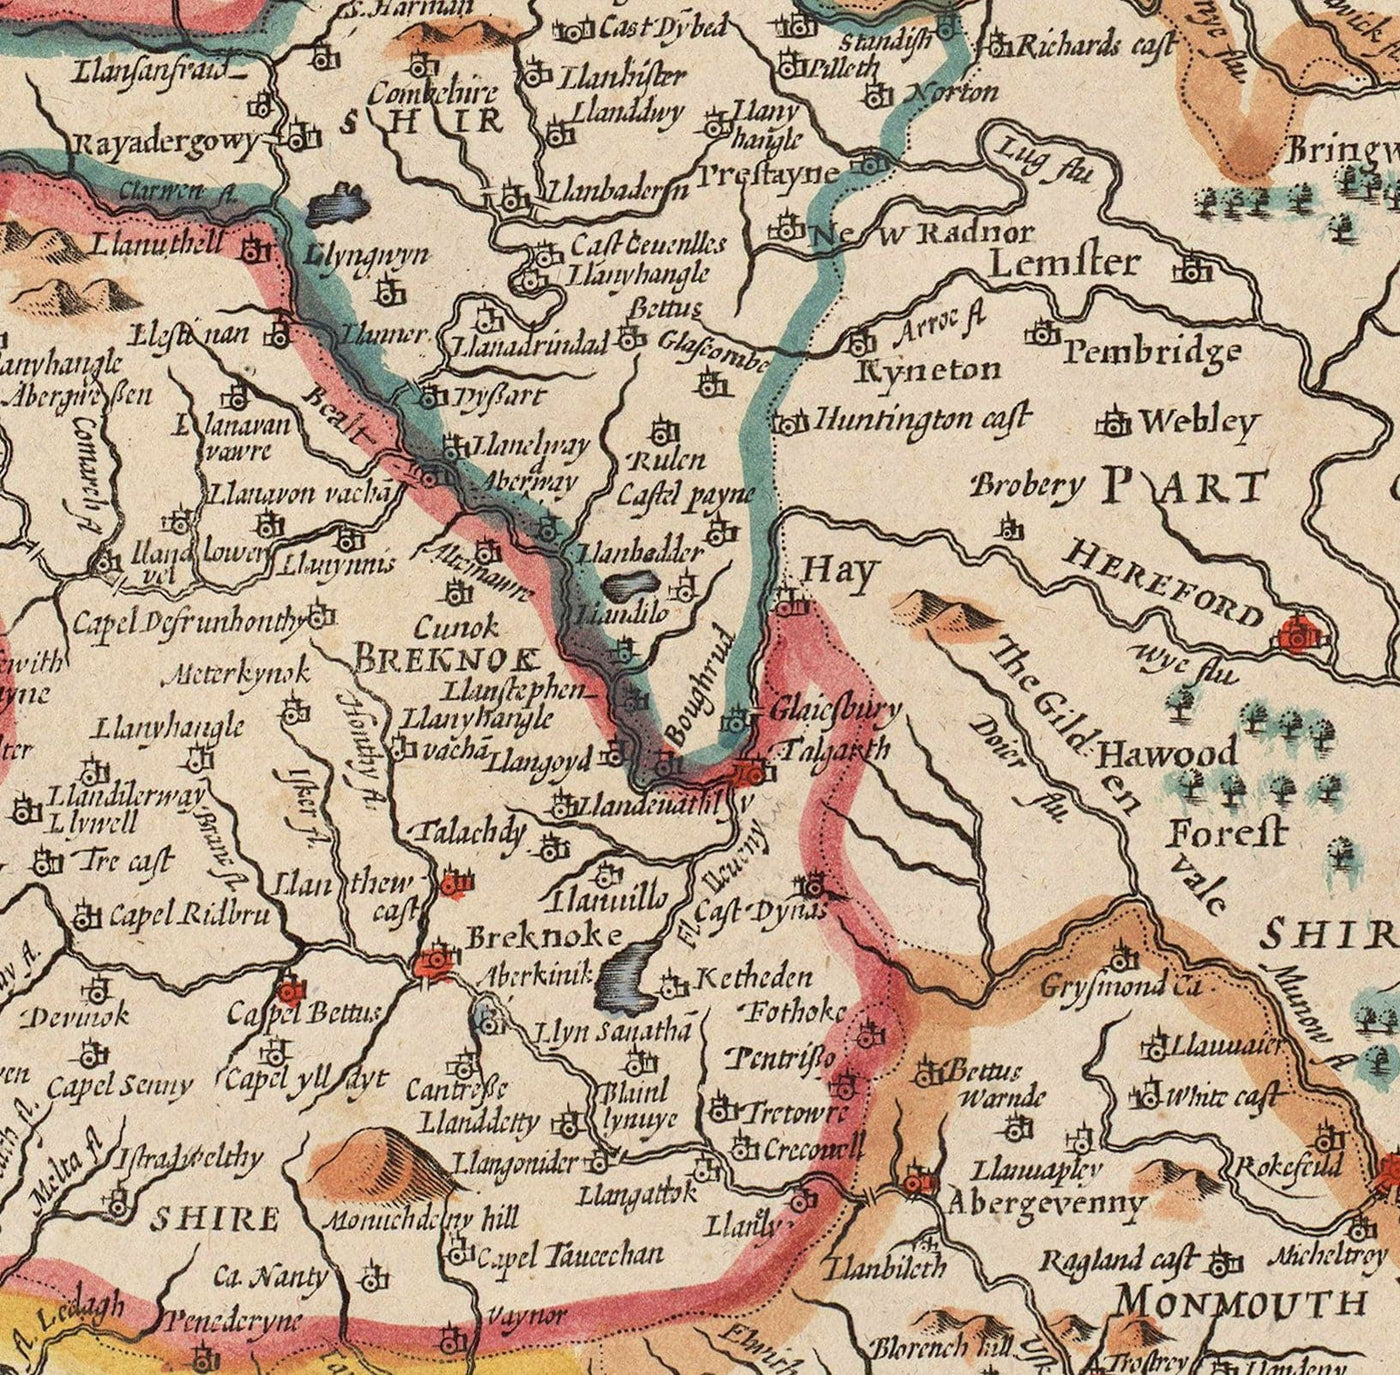 Old Colour Map of Wales, Cymru by John Speed, 1610